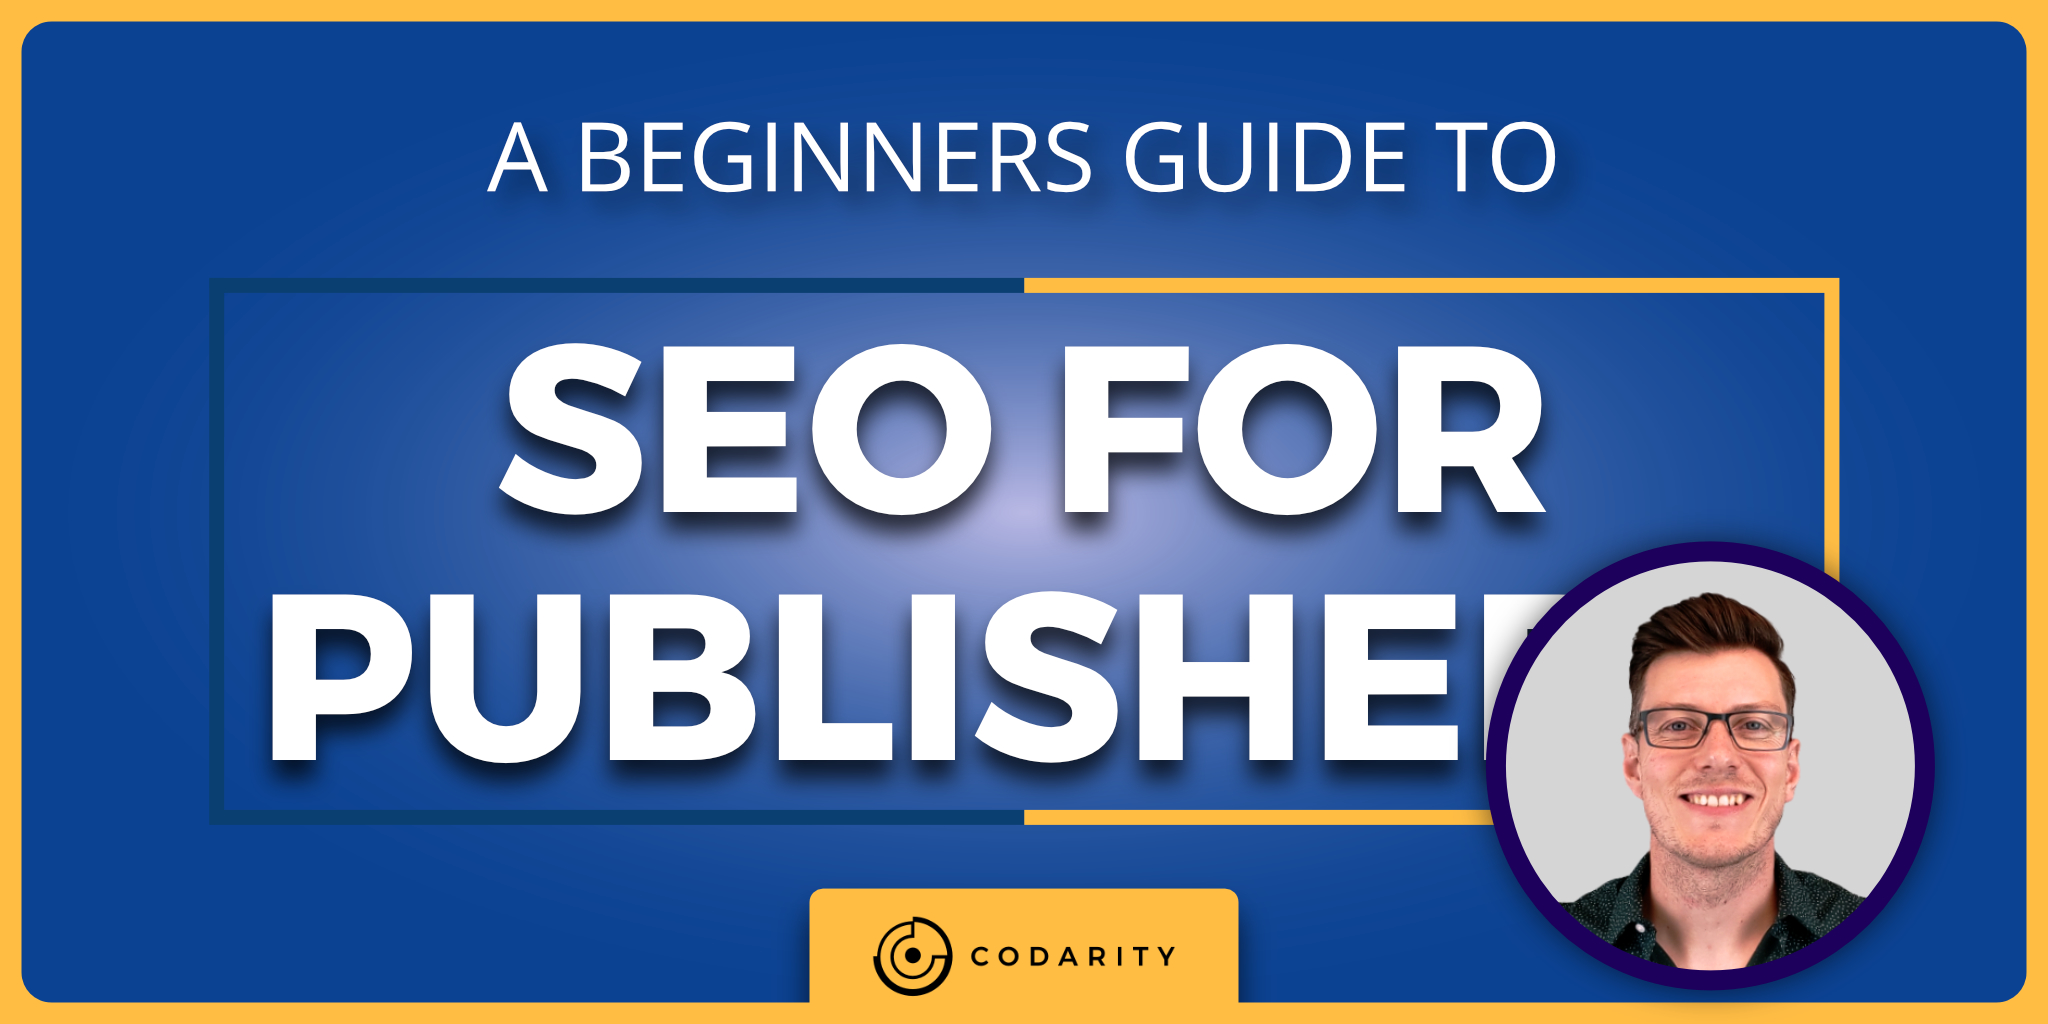 Featured image for “A Beginners Guide To SEO For Publishers”